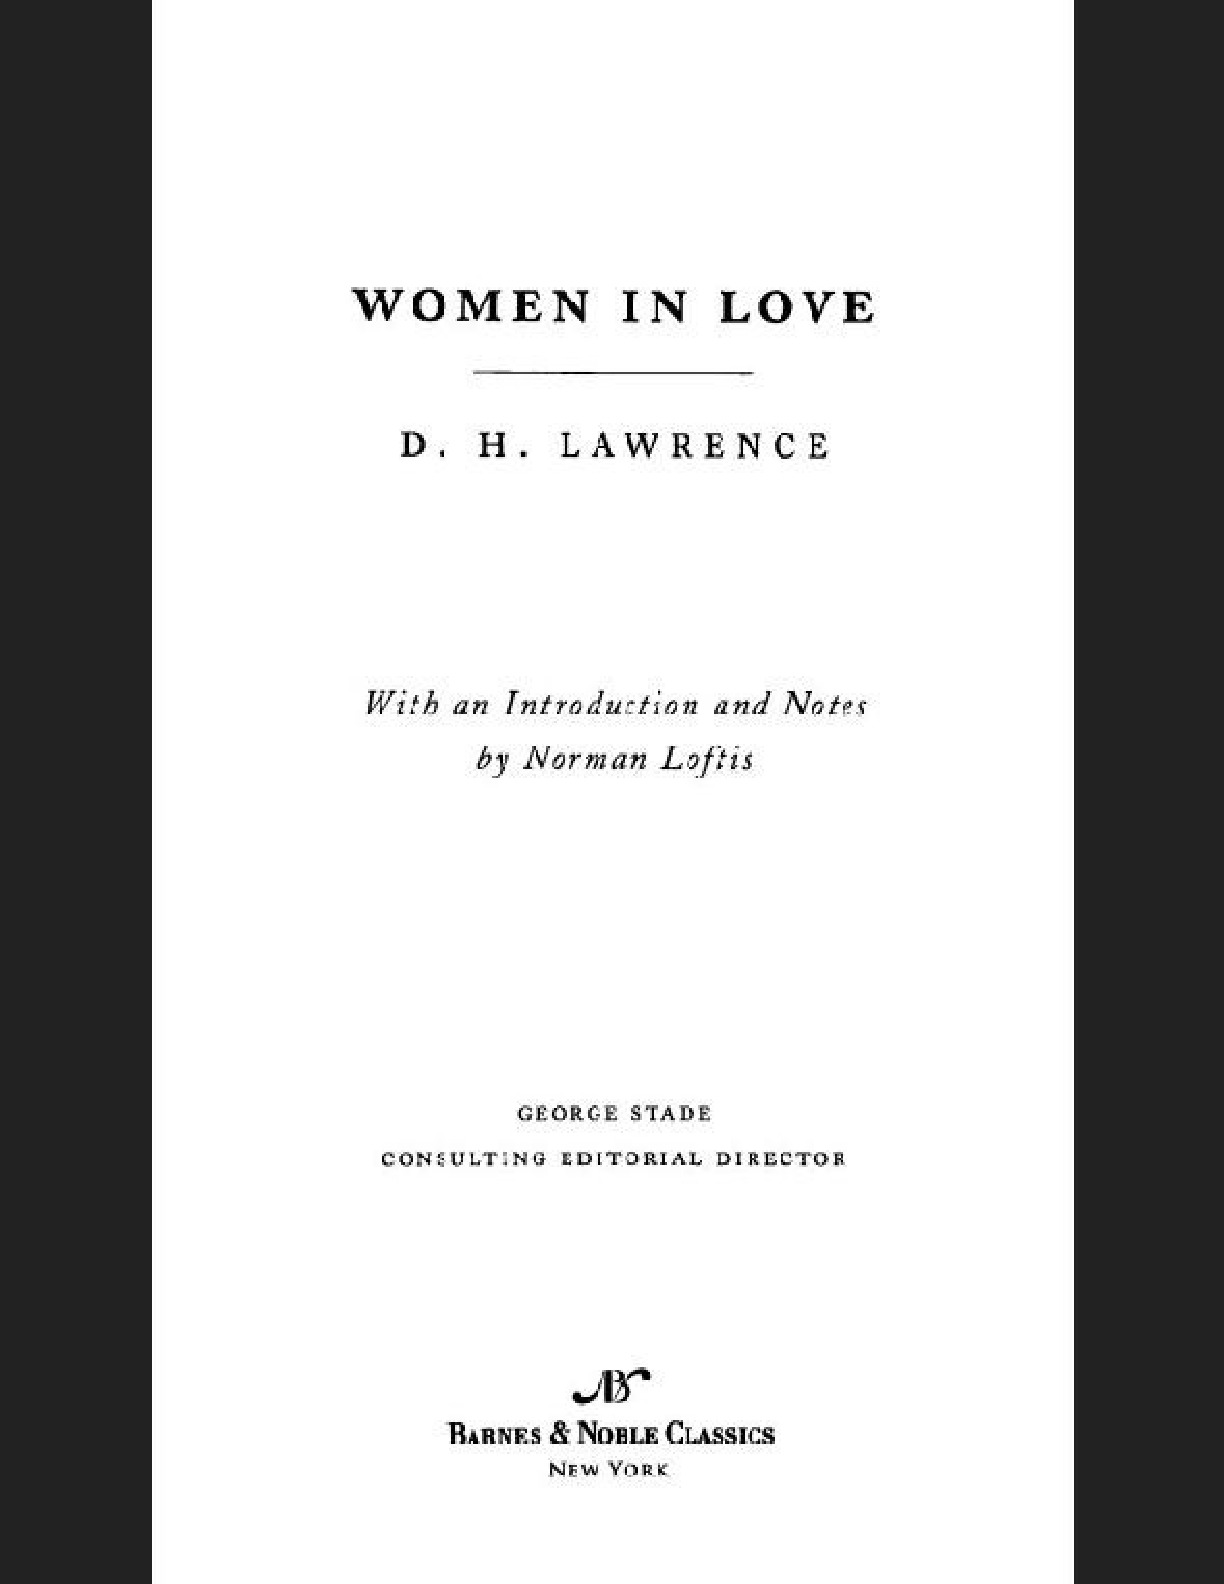 Women in Love (Barnes & Noble Classics Series) – D. H. Lawrence